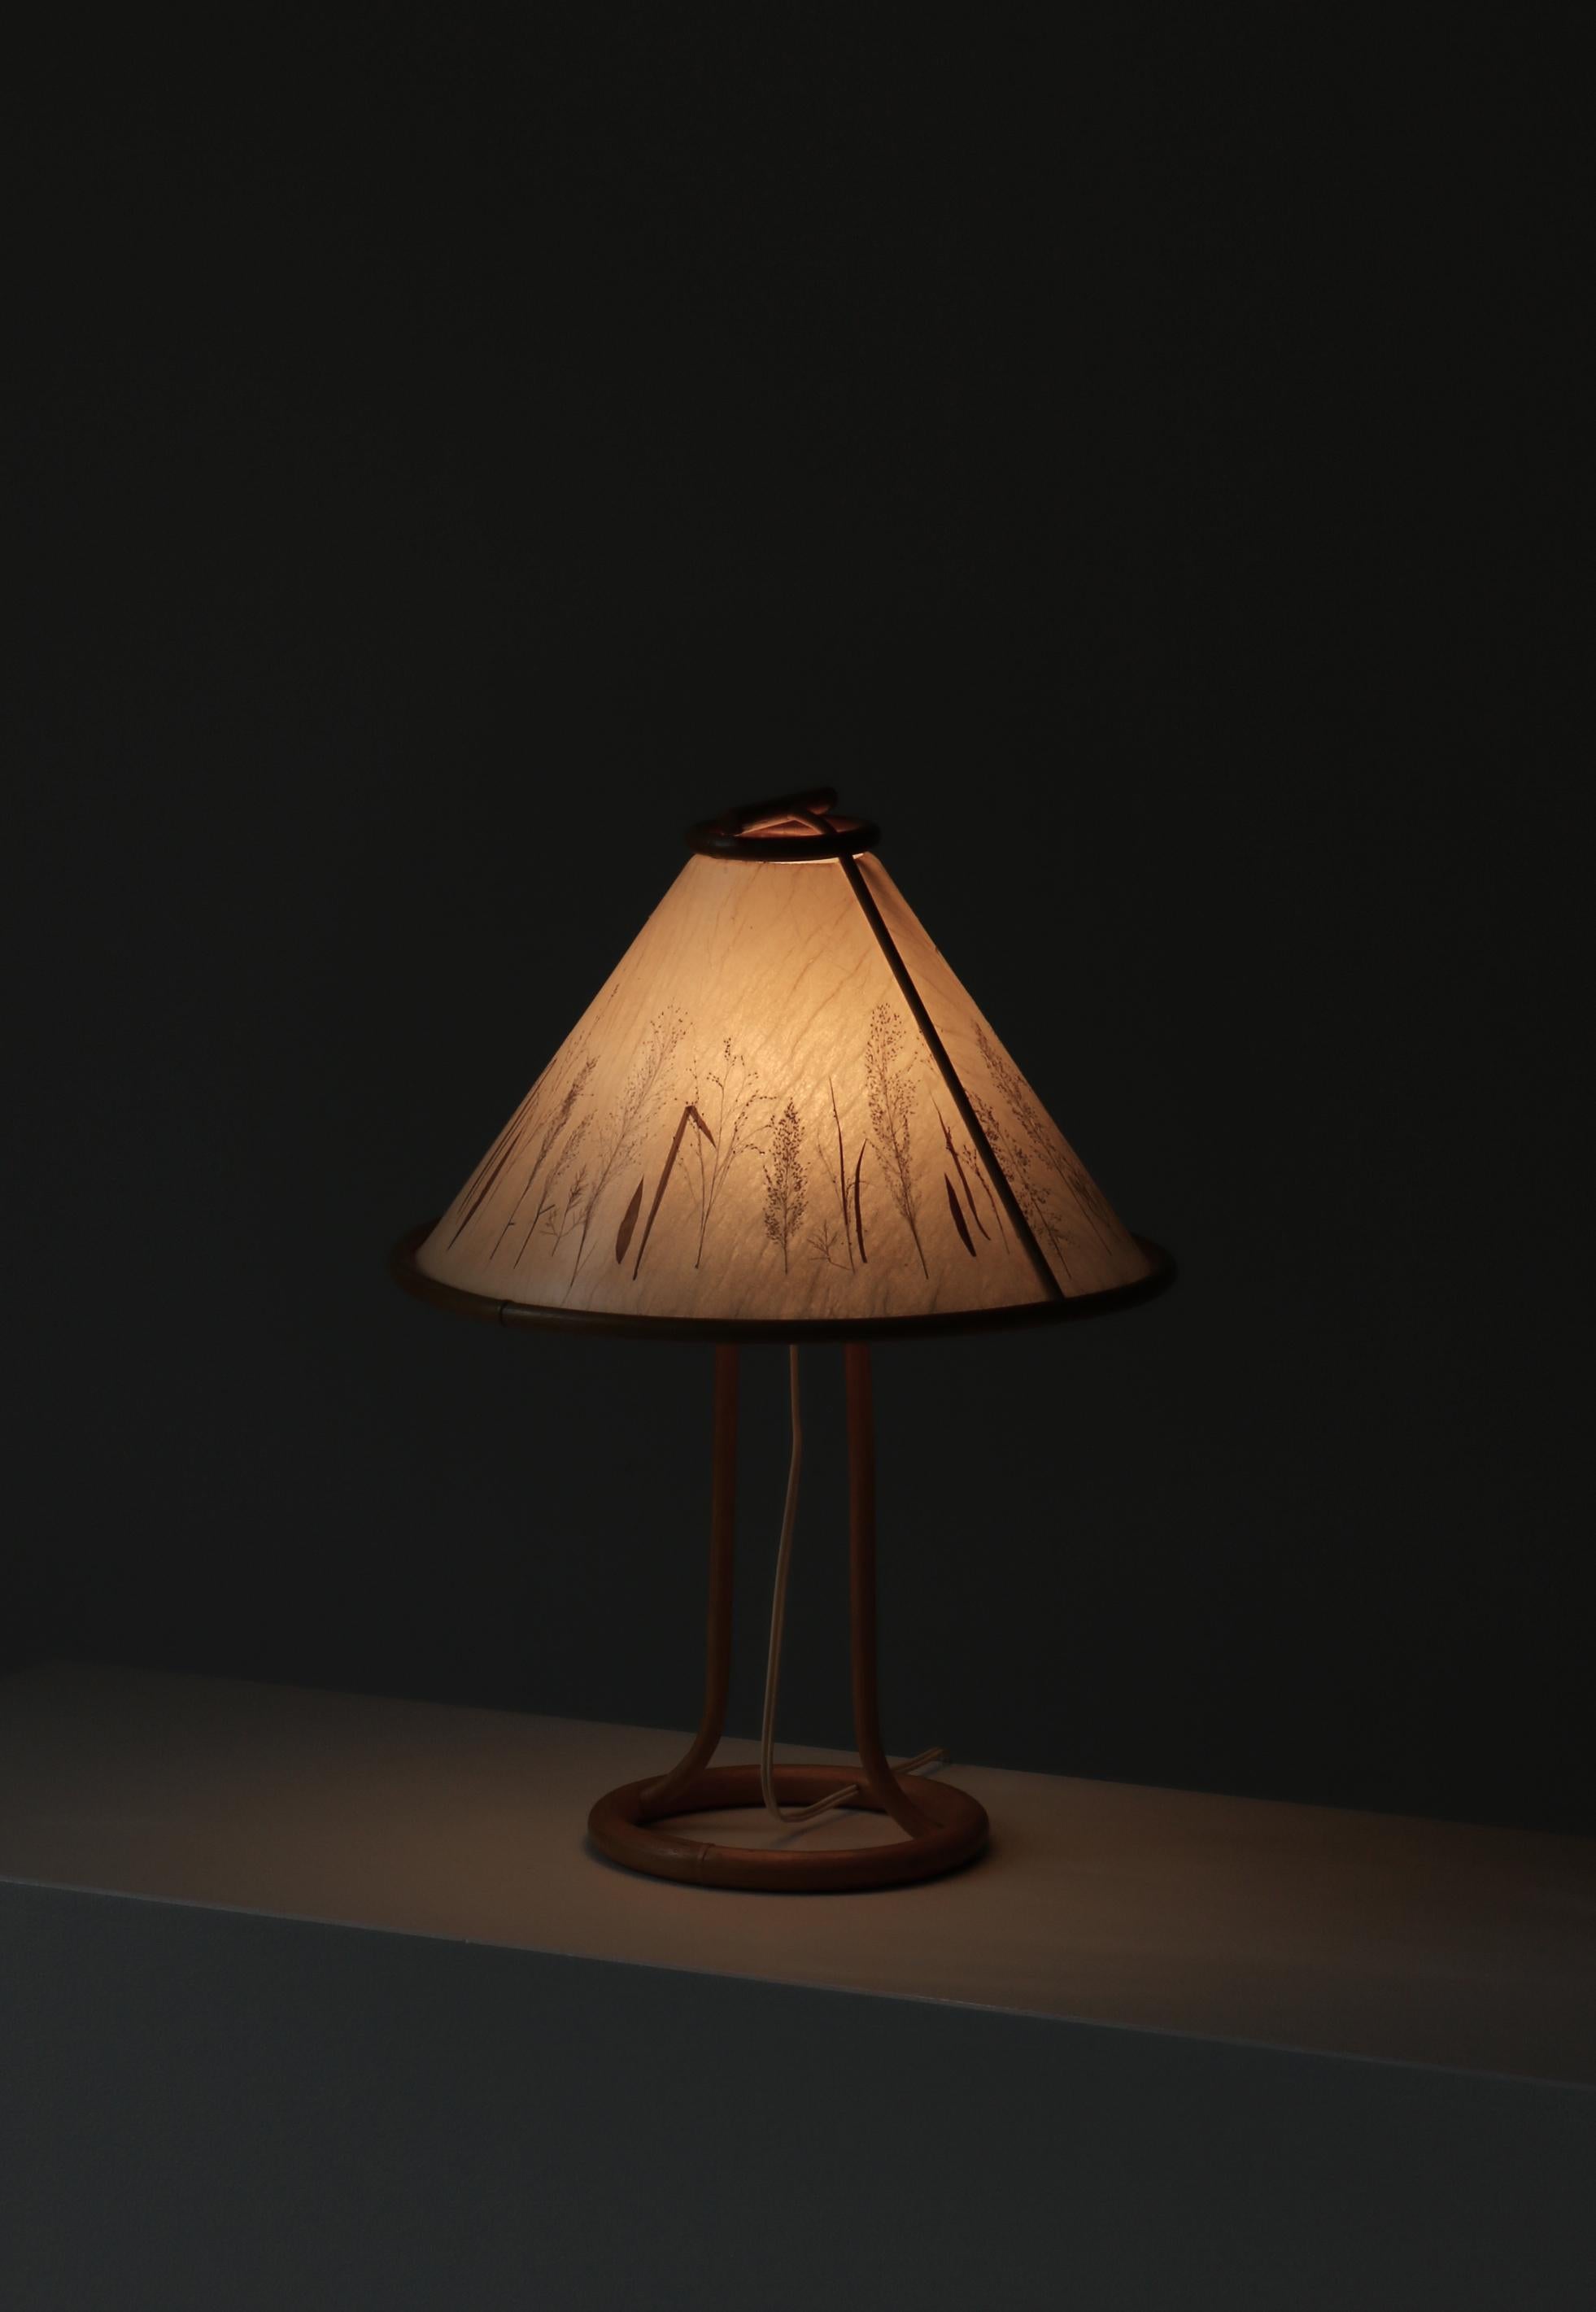 Scandinavian Wabi-Sabi Bamboo Table Lamp Shade with Pressed Plants, 1950s For Sale 4